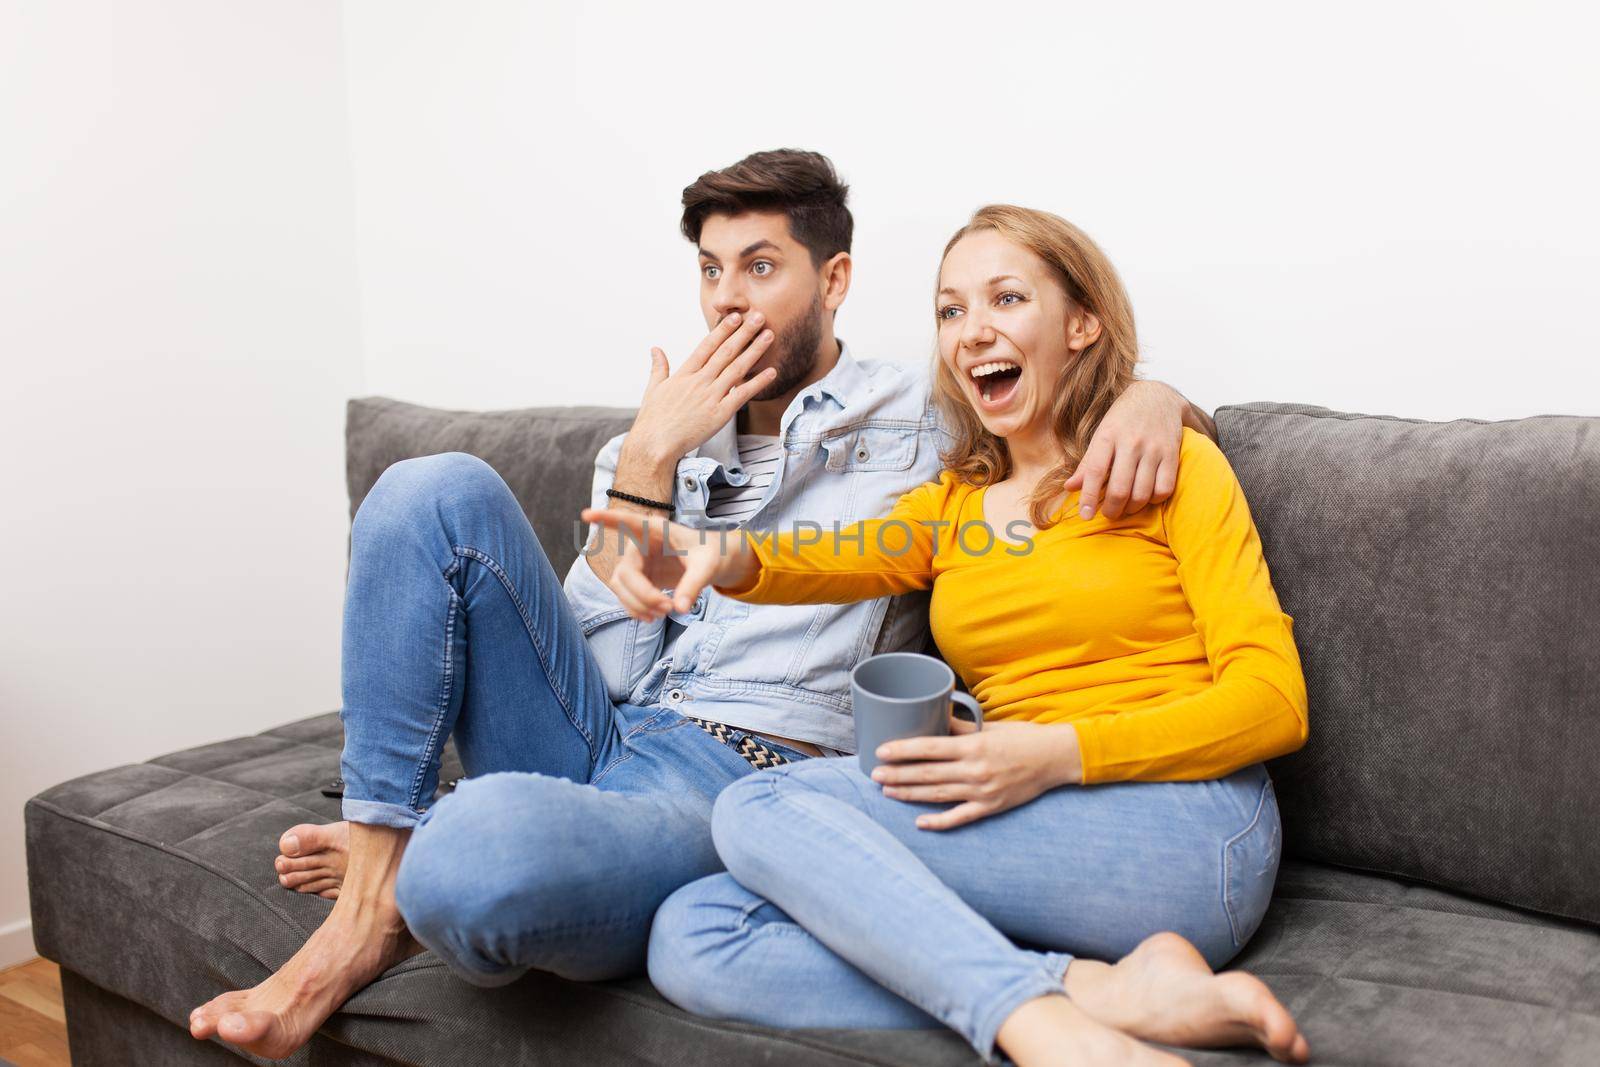 couple in love on a sofa watching tv and smiling by kokimk